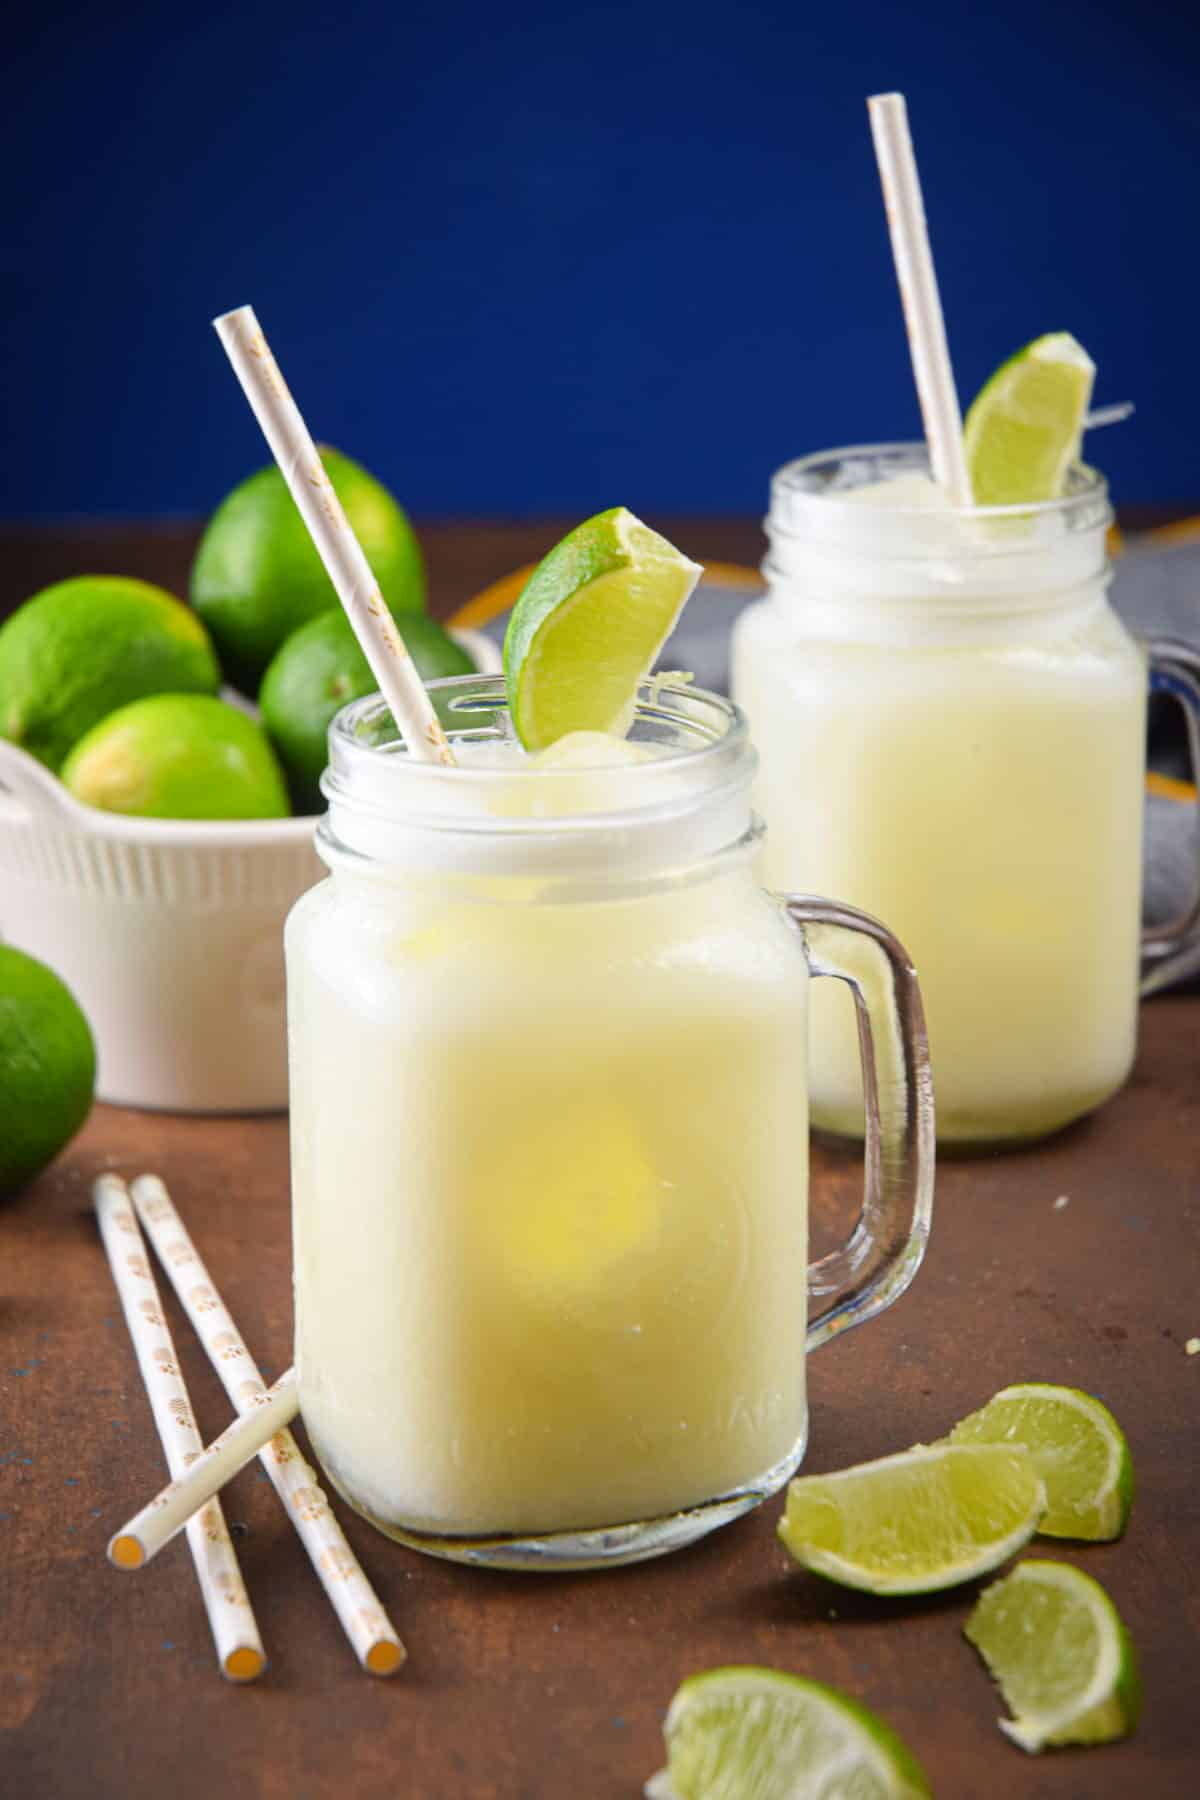 Brazilian lemonade in glass jars with lime wedges and paper straws, limes in a bowl on the side.